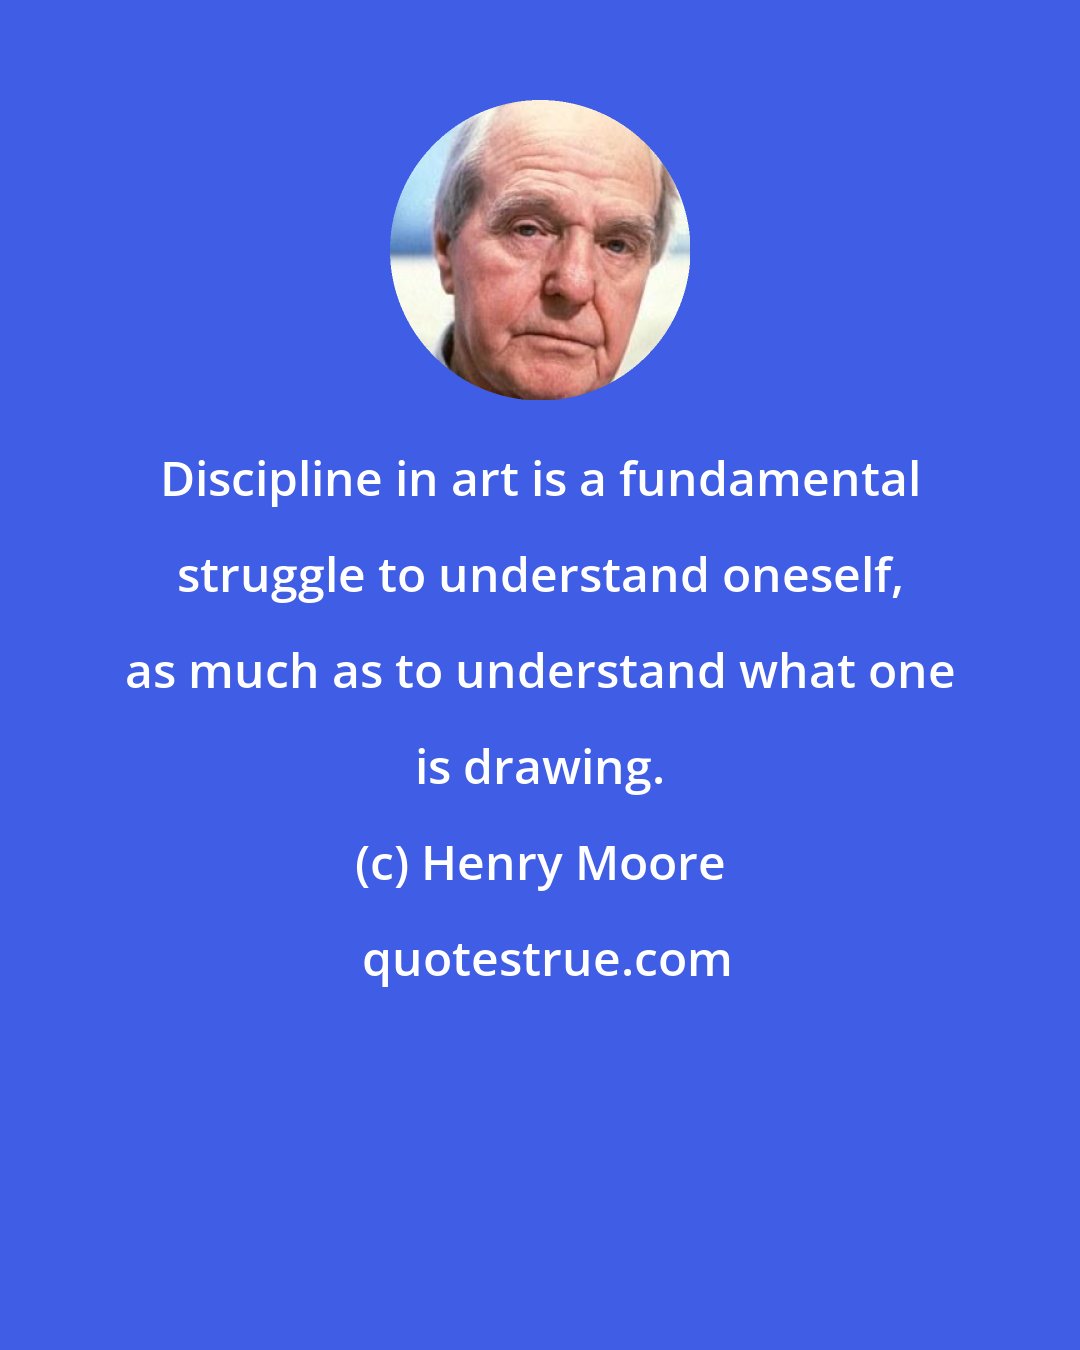 Henry Moore: Discipline in art is a fundamental struggle to understand oneself, as much as to understand what one is drawing.